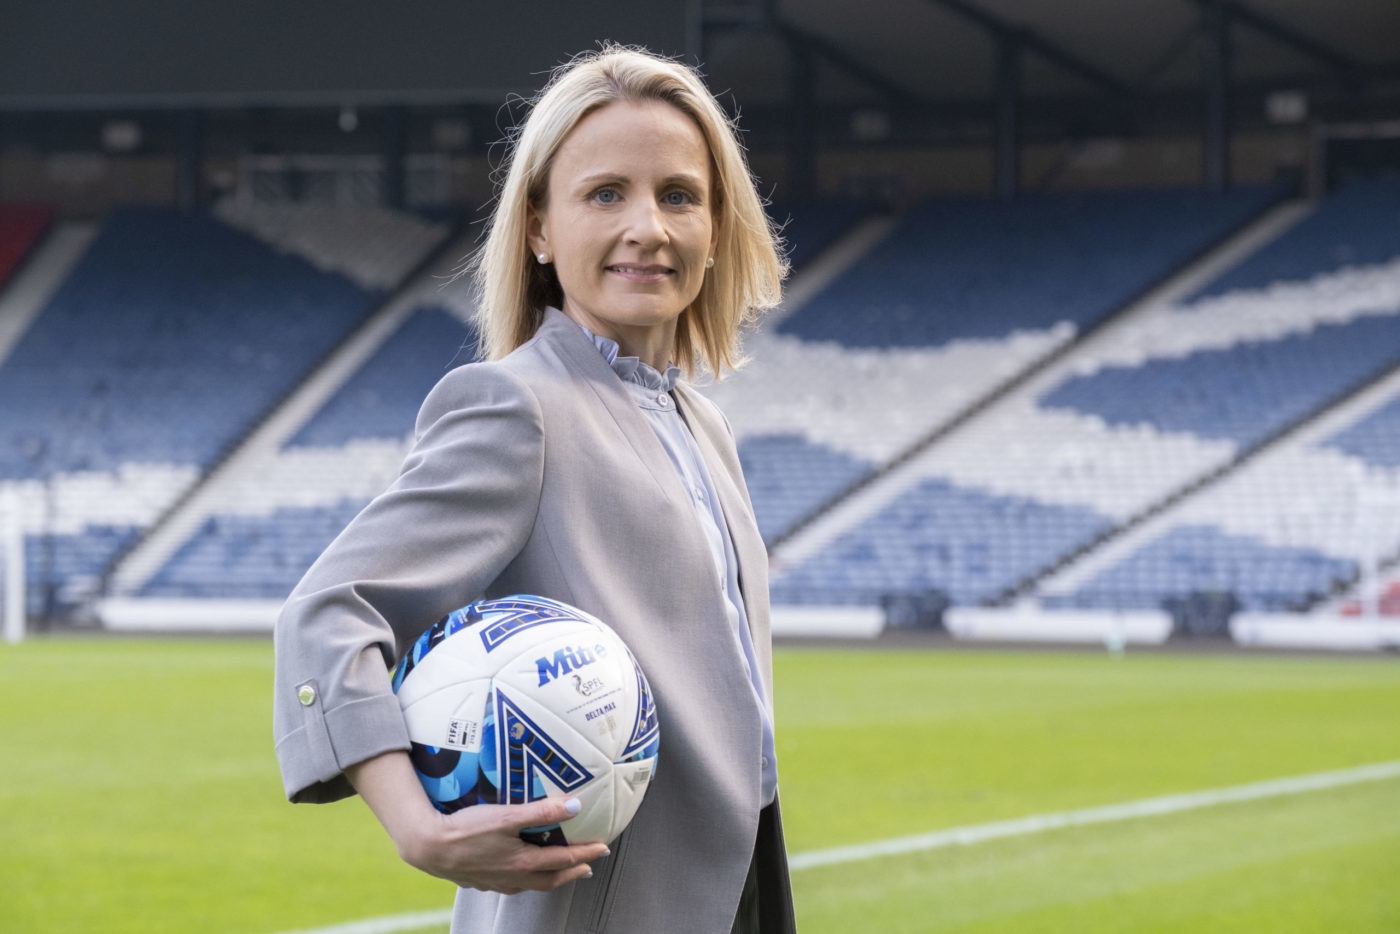 Mitre to be Scottish Women’s Premier League first-ever official Match Ball Partner